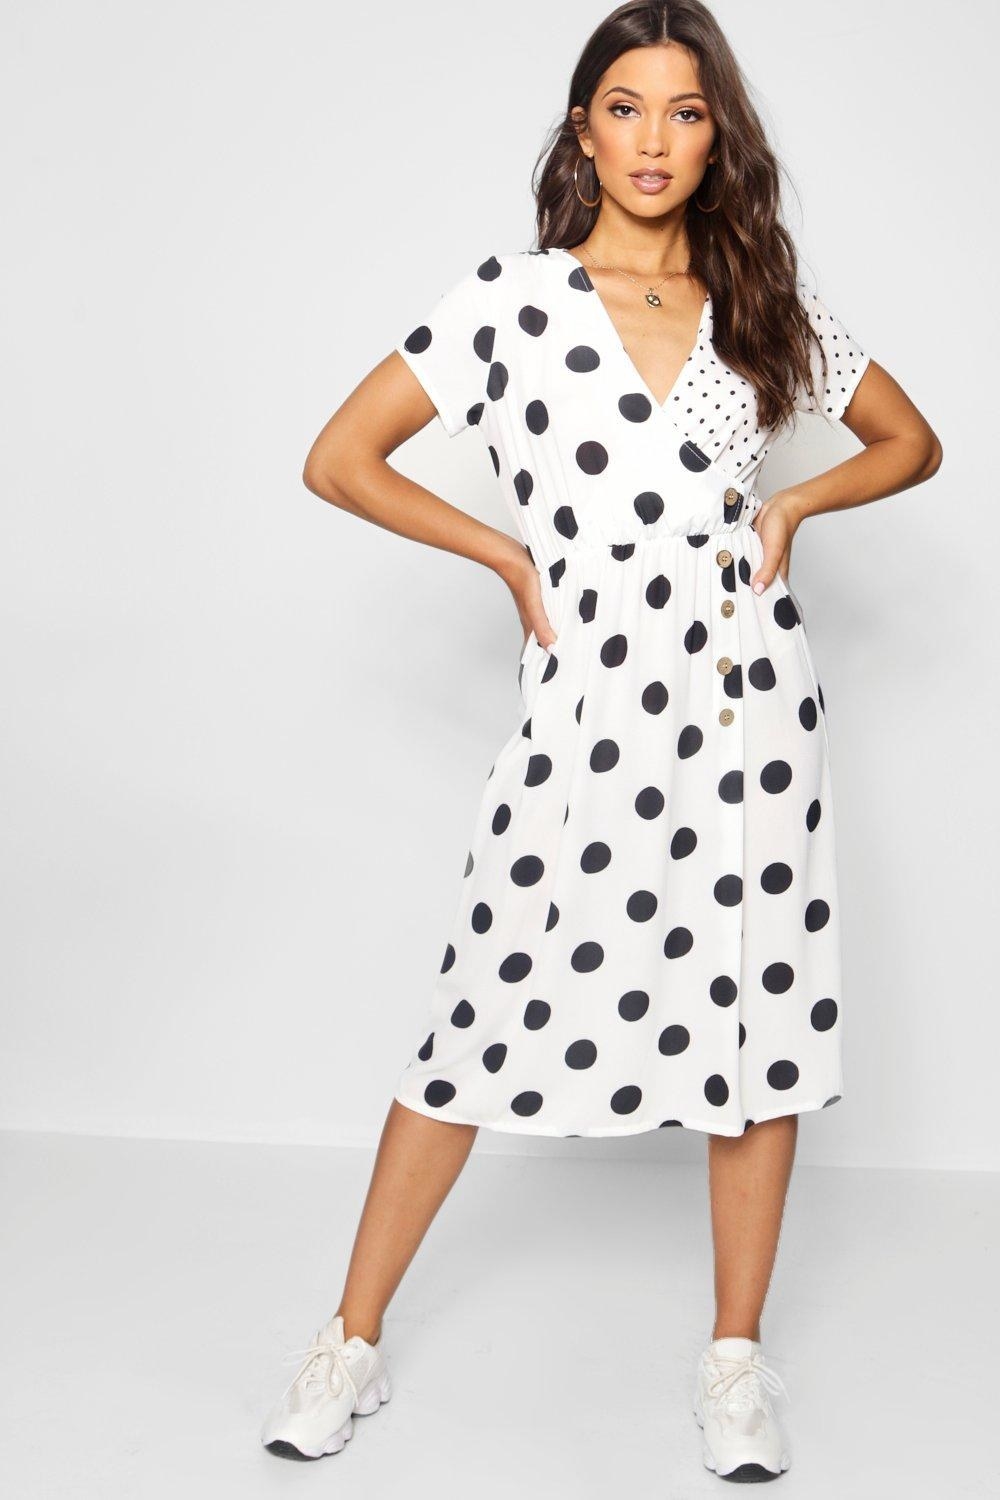 Everything Is 50% Off At Boohoo Right Now, So Get Ready